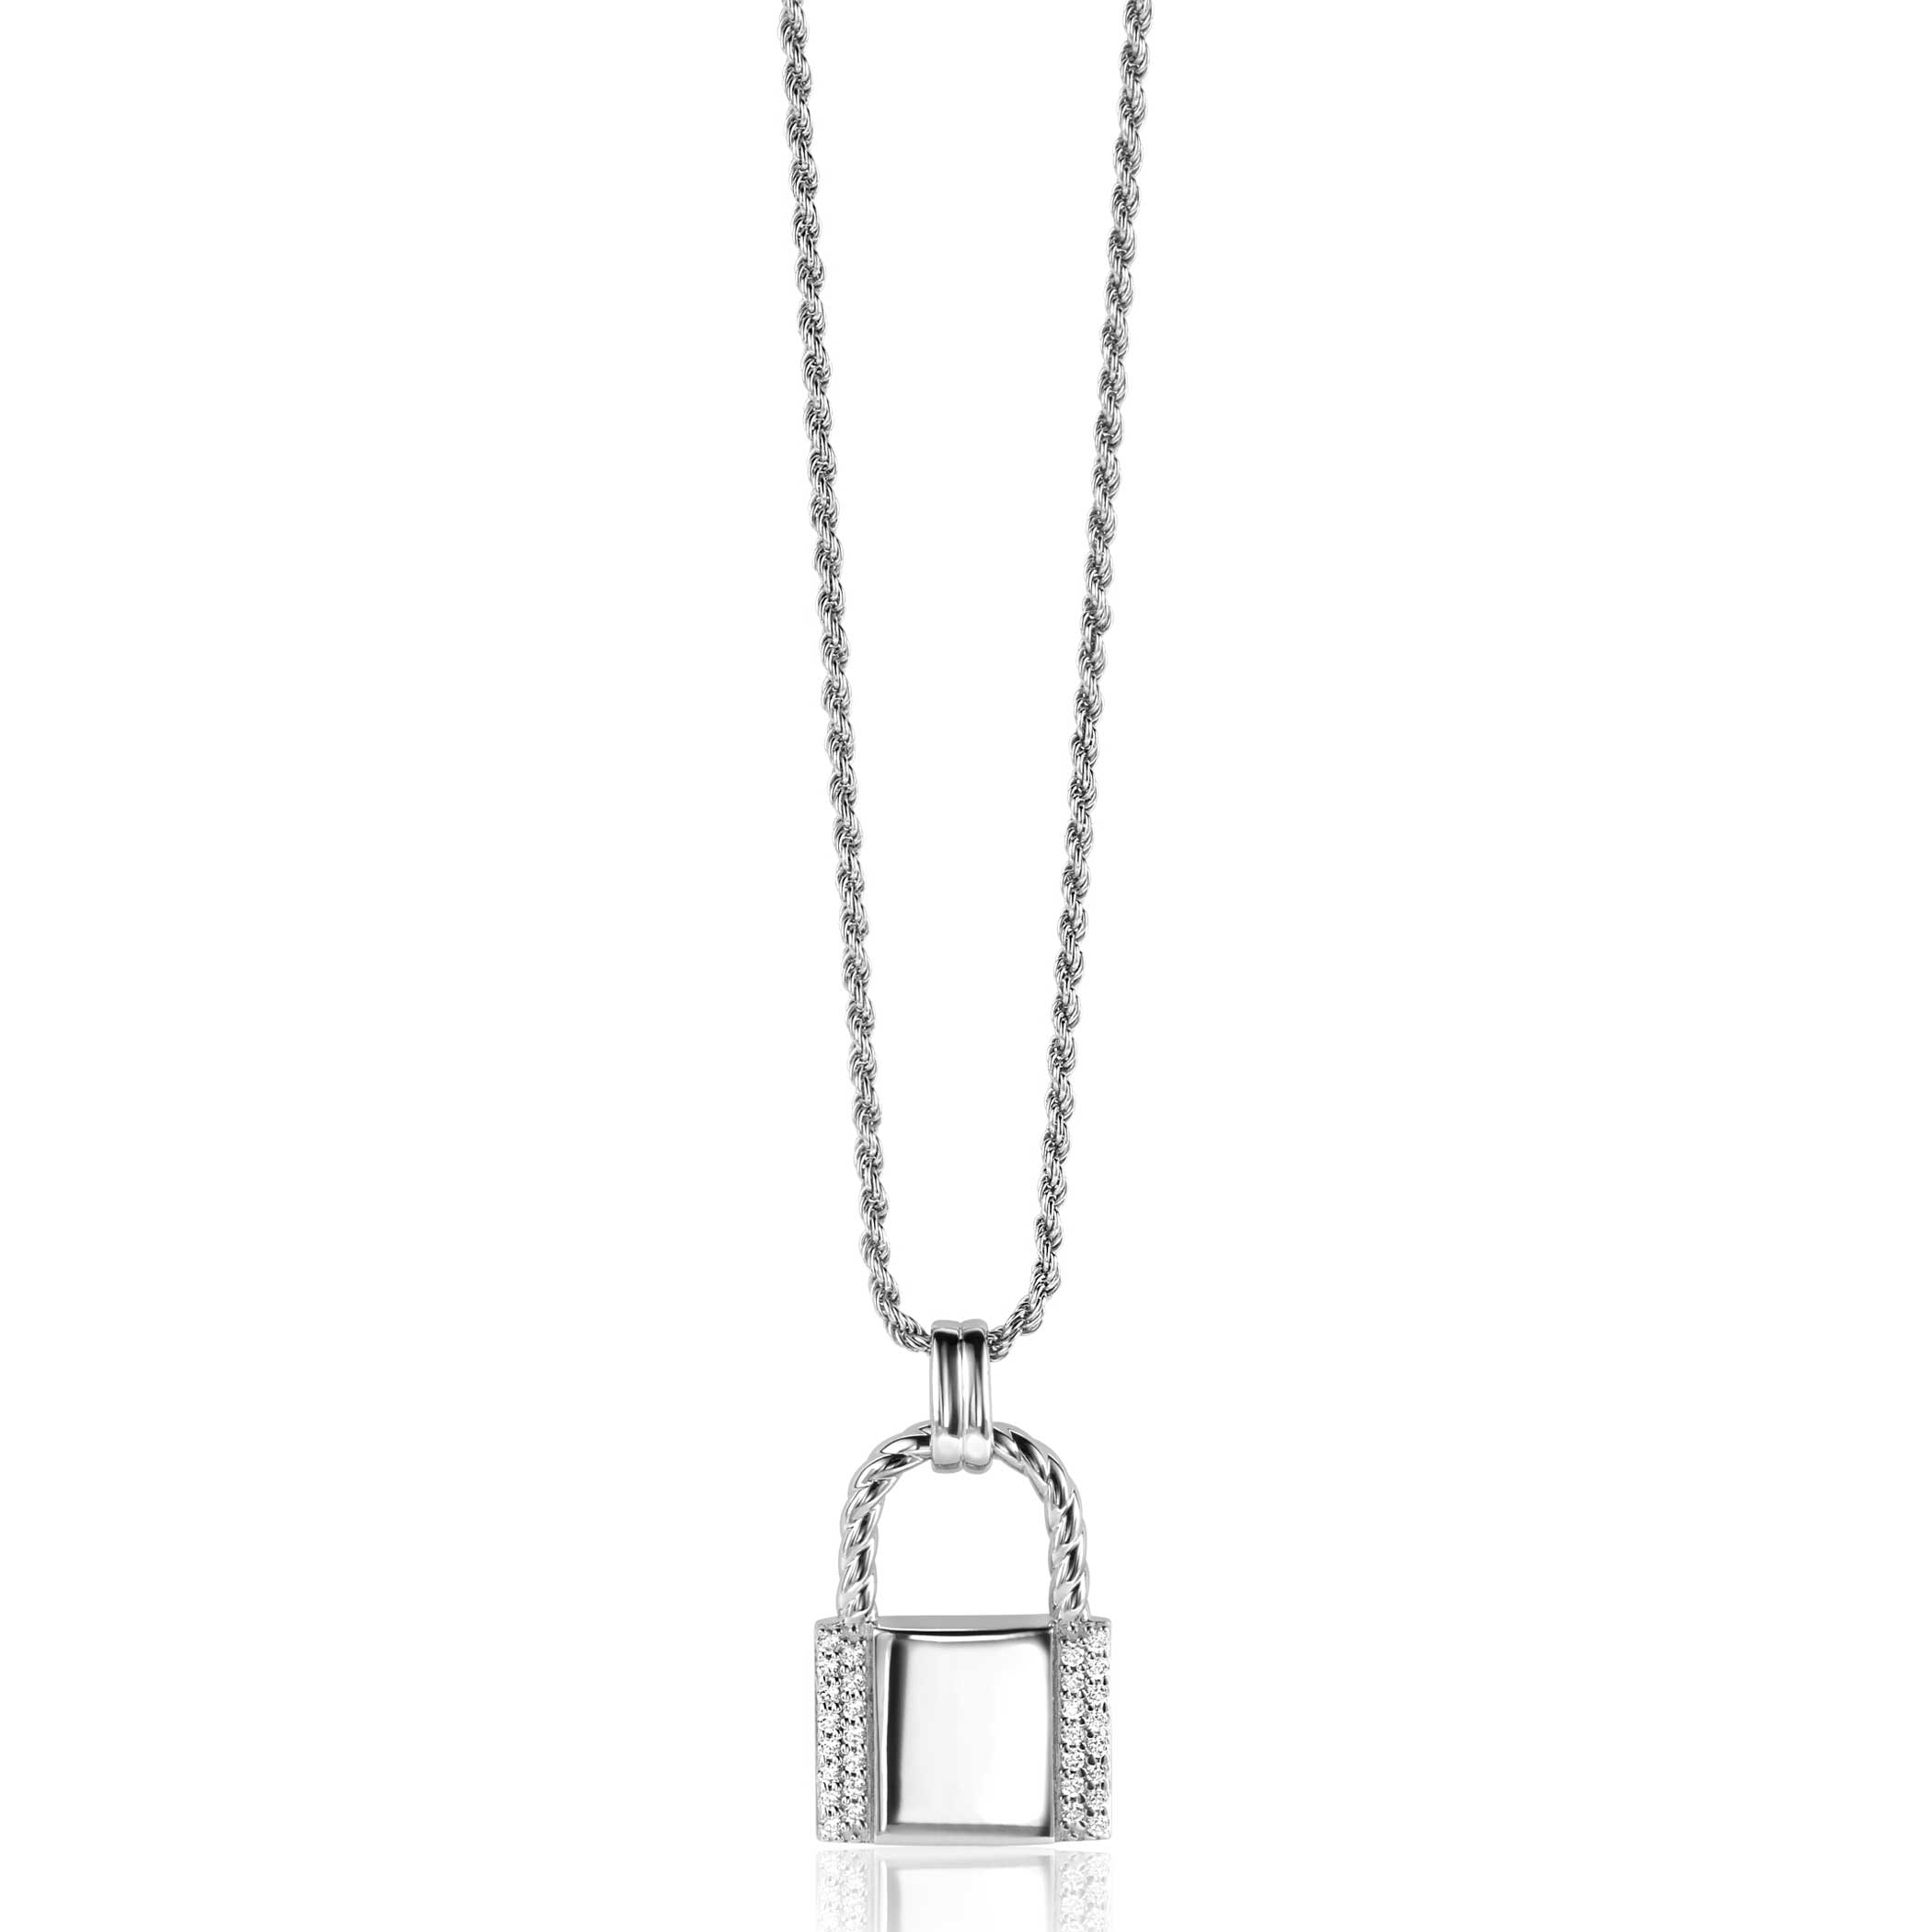 25mm ZINZI Sterling Silver Pendant Lock with White Zirconias ZIH2391L (excl. necklace)